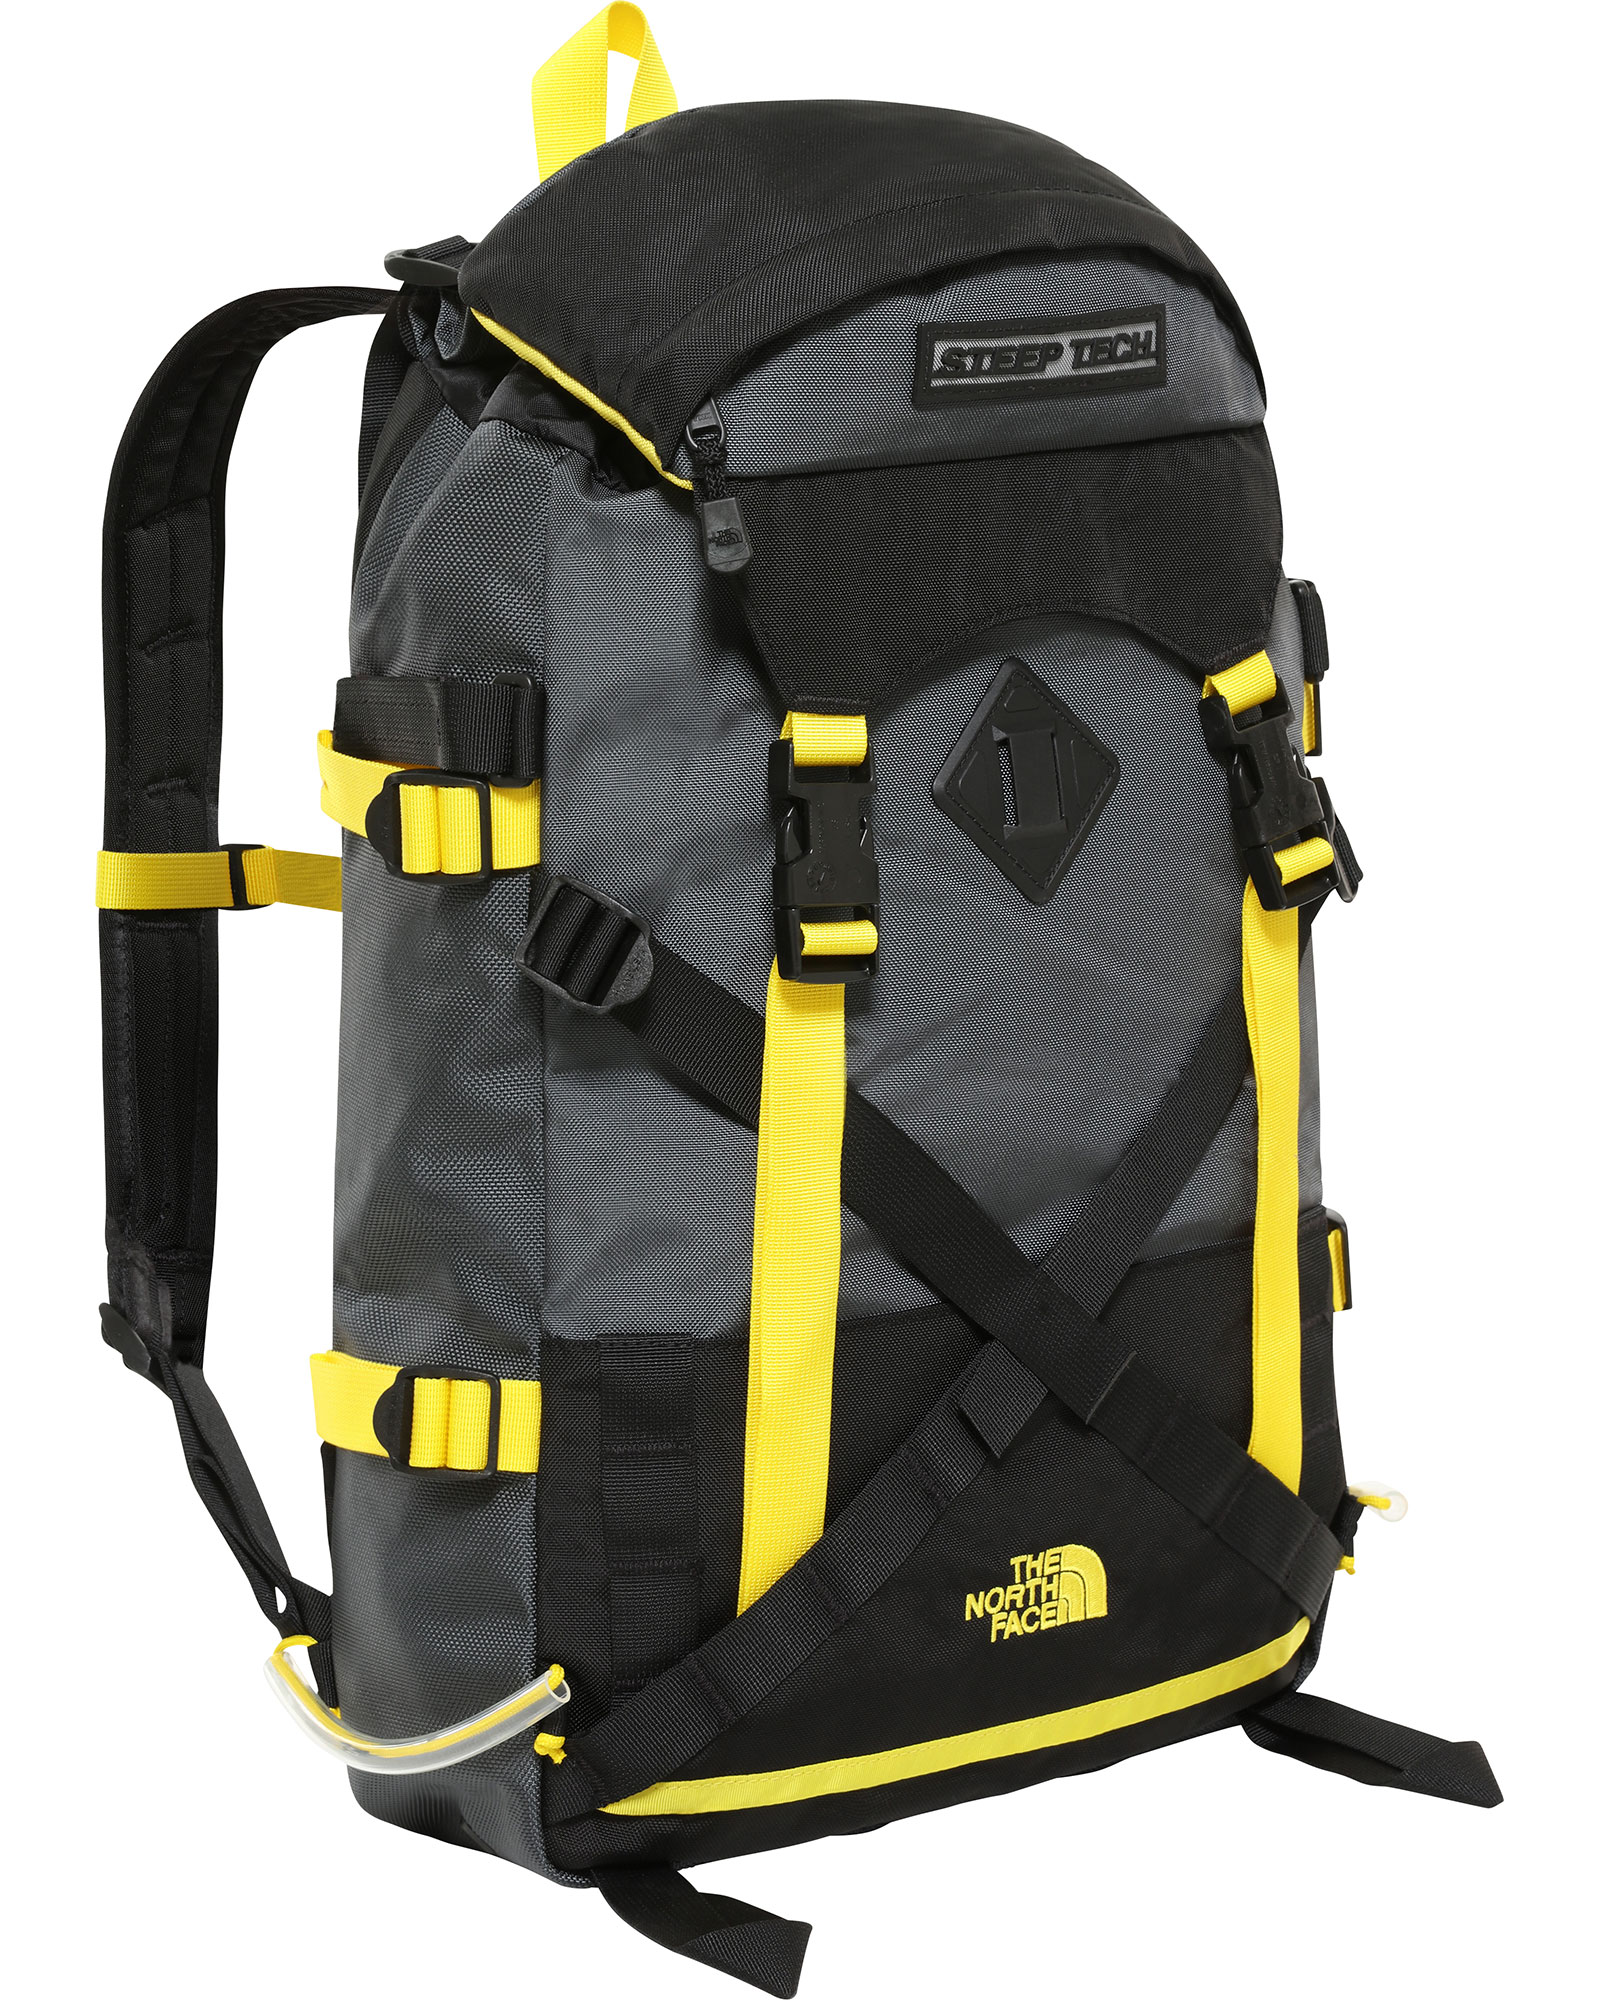 The North Face Steep Tech Pack